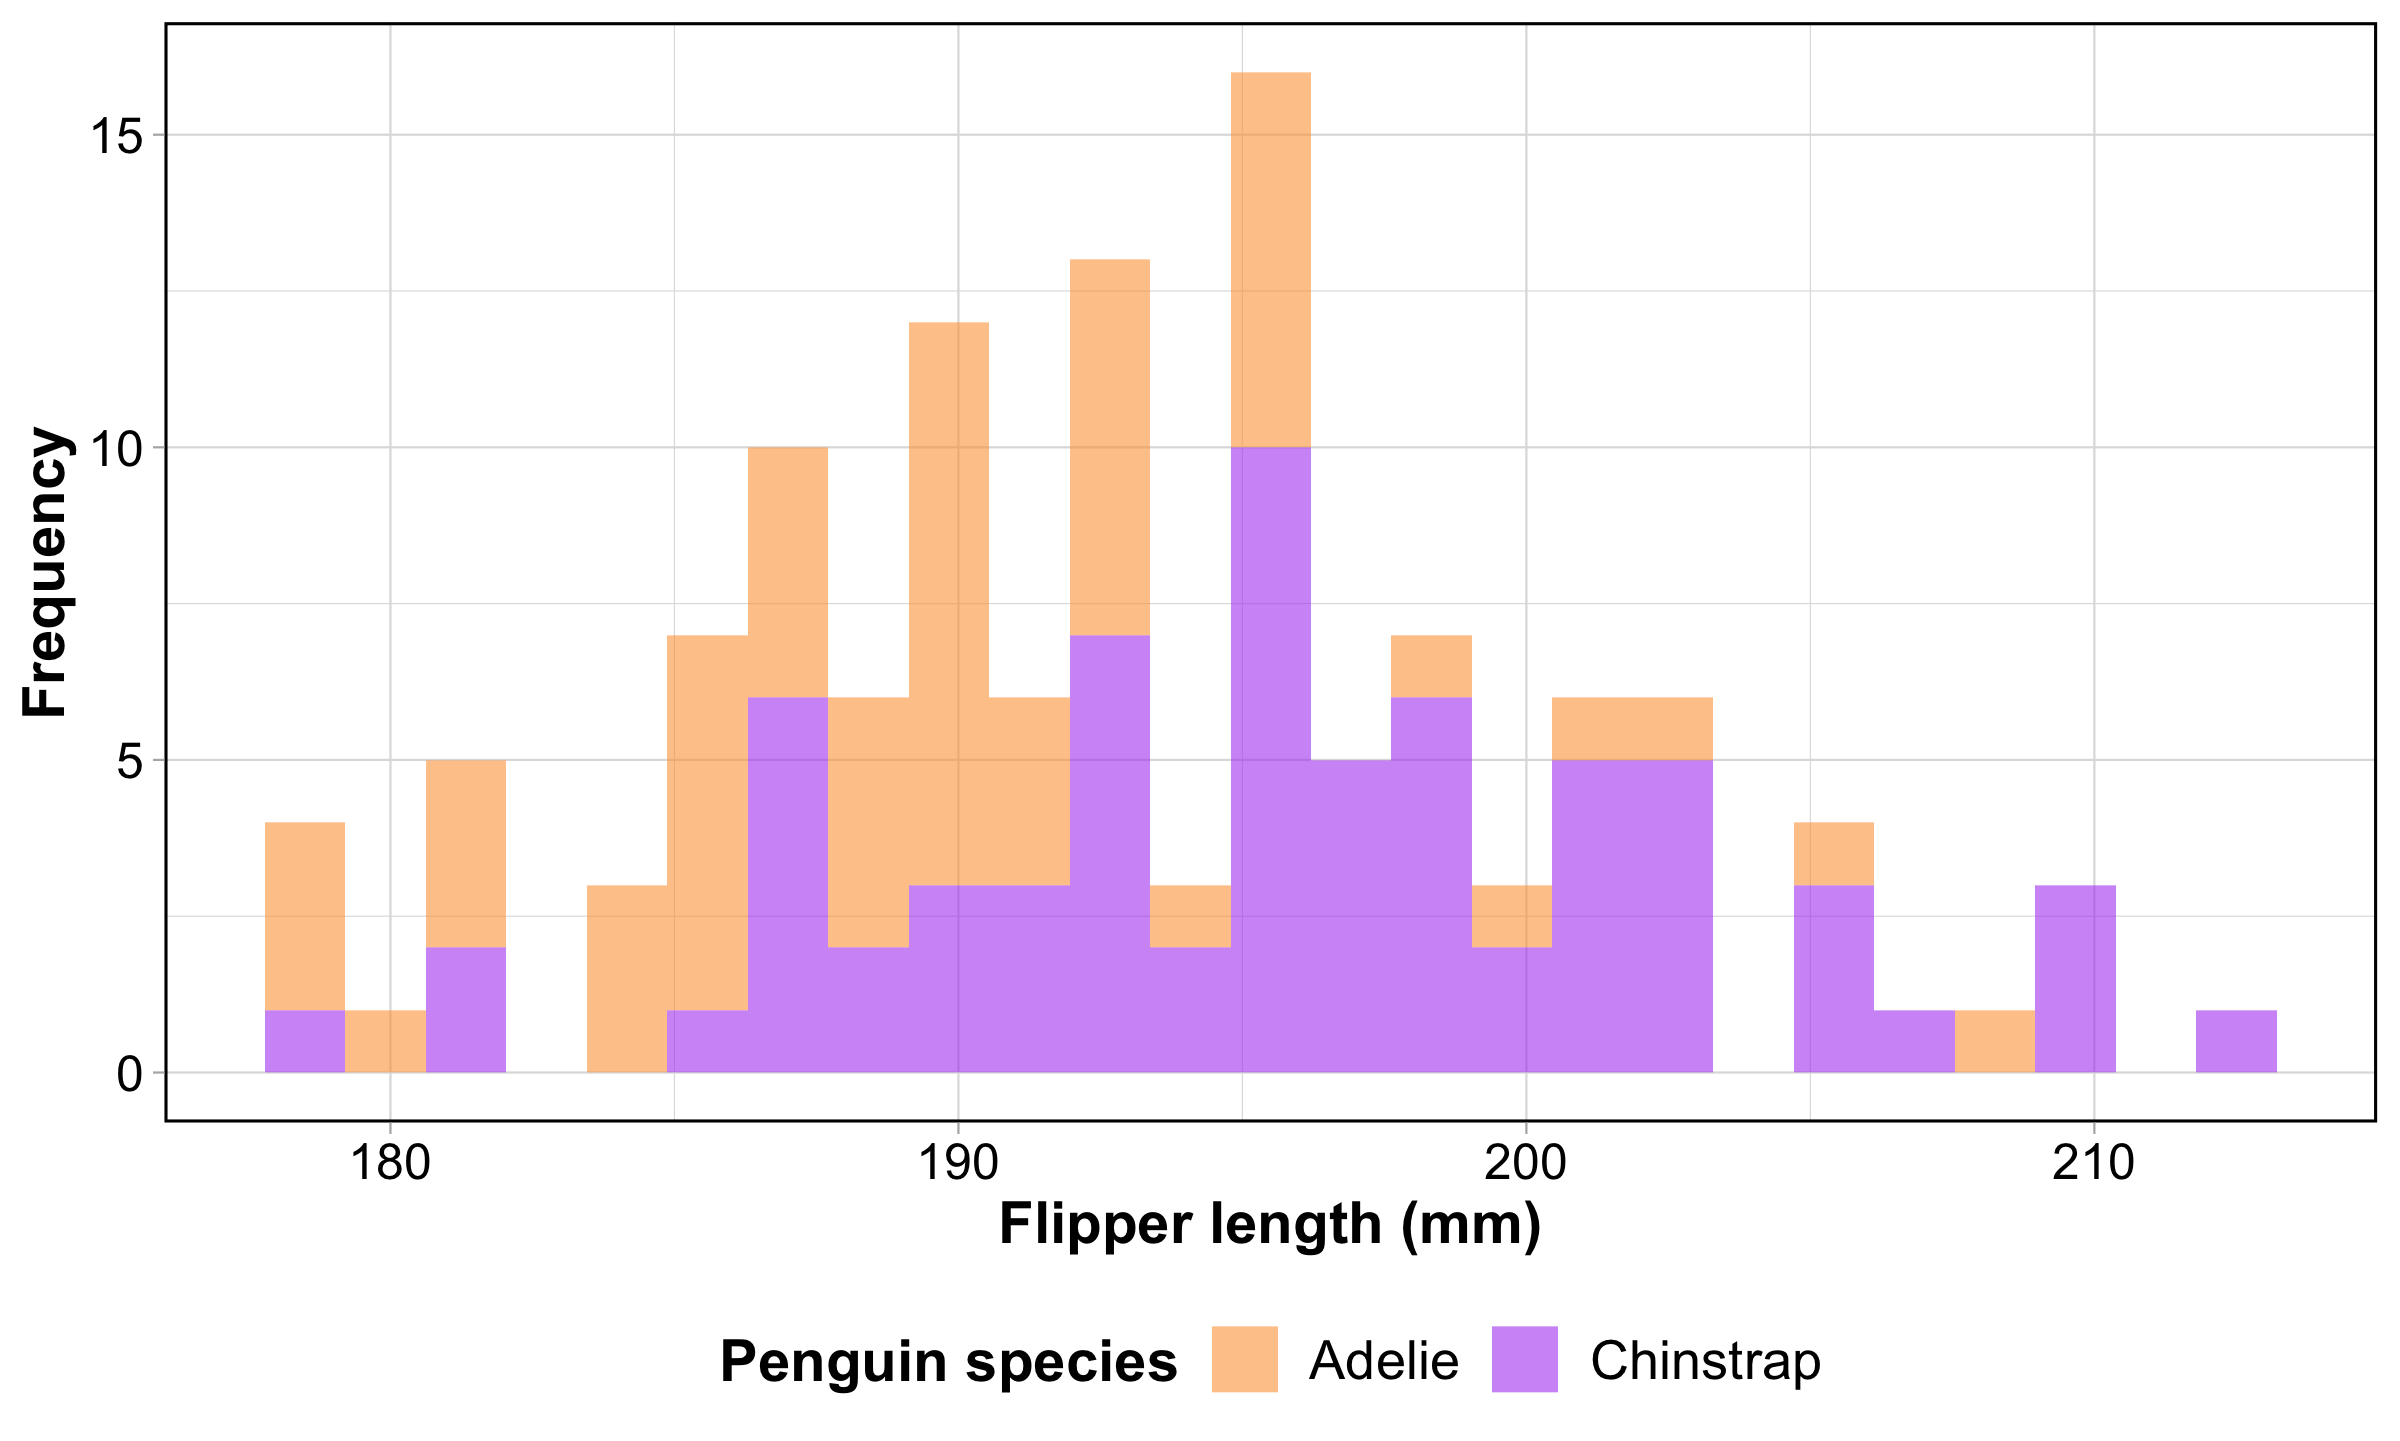 A histogram of penguin Flipper lengths (mm) with bars colored by species. Adelie are orange and Chinstrap are purple.